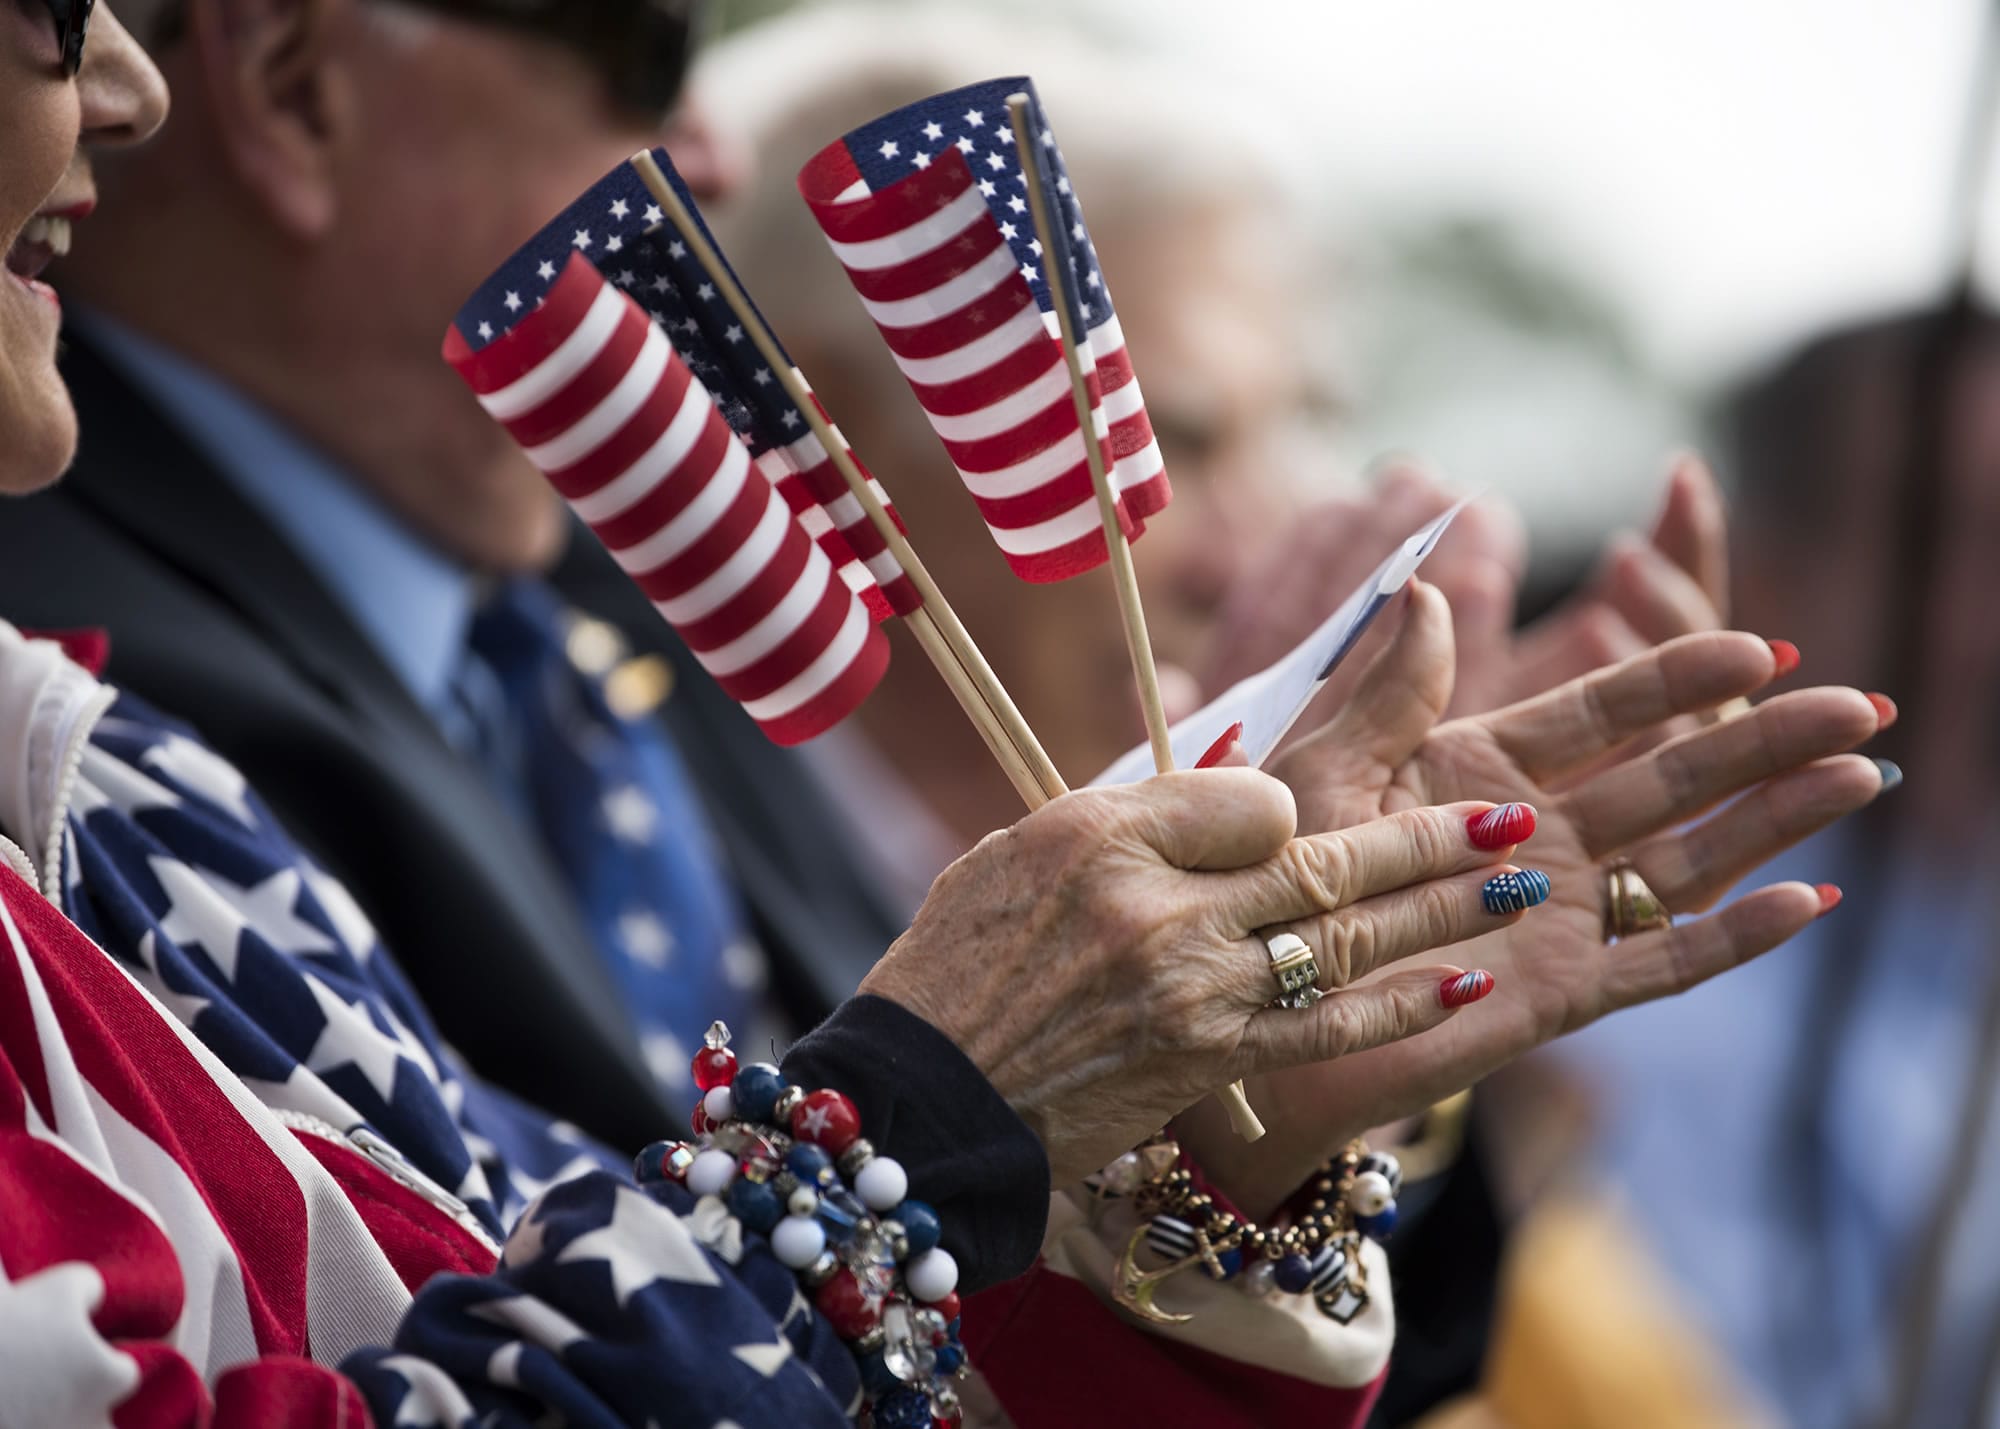 Judy Kutch of Washougal applauds during the Clark County mayors' patriotic tie contest at Fort Vancouver's 23rd annual Flag Day celebration on Wednesday June 14, 2017.